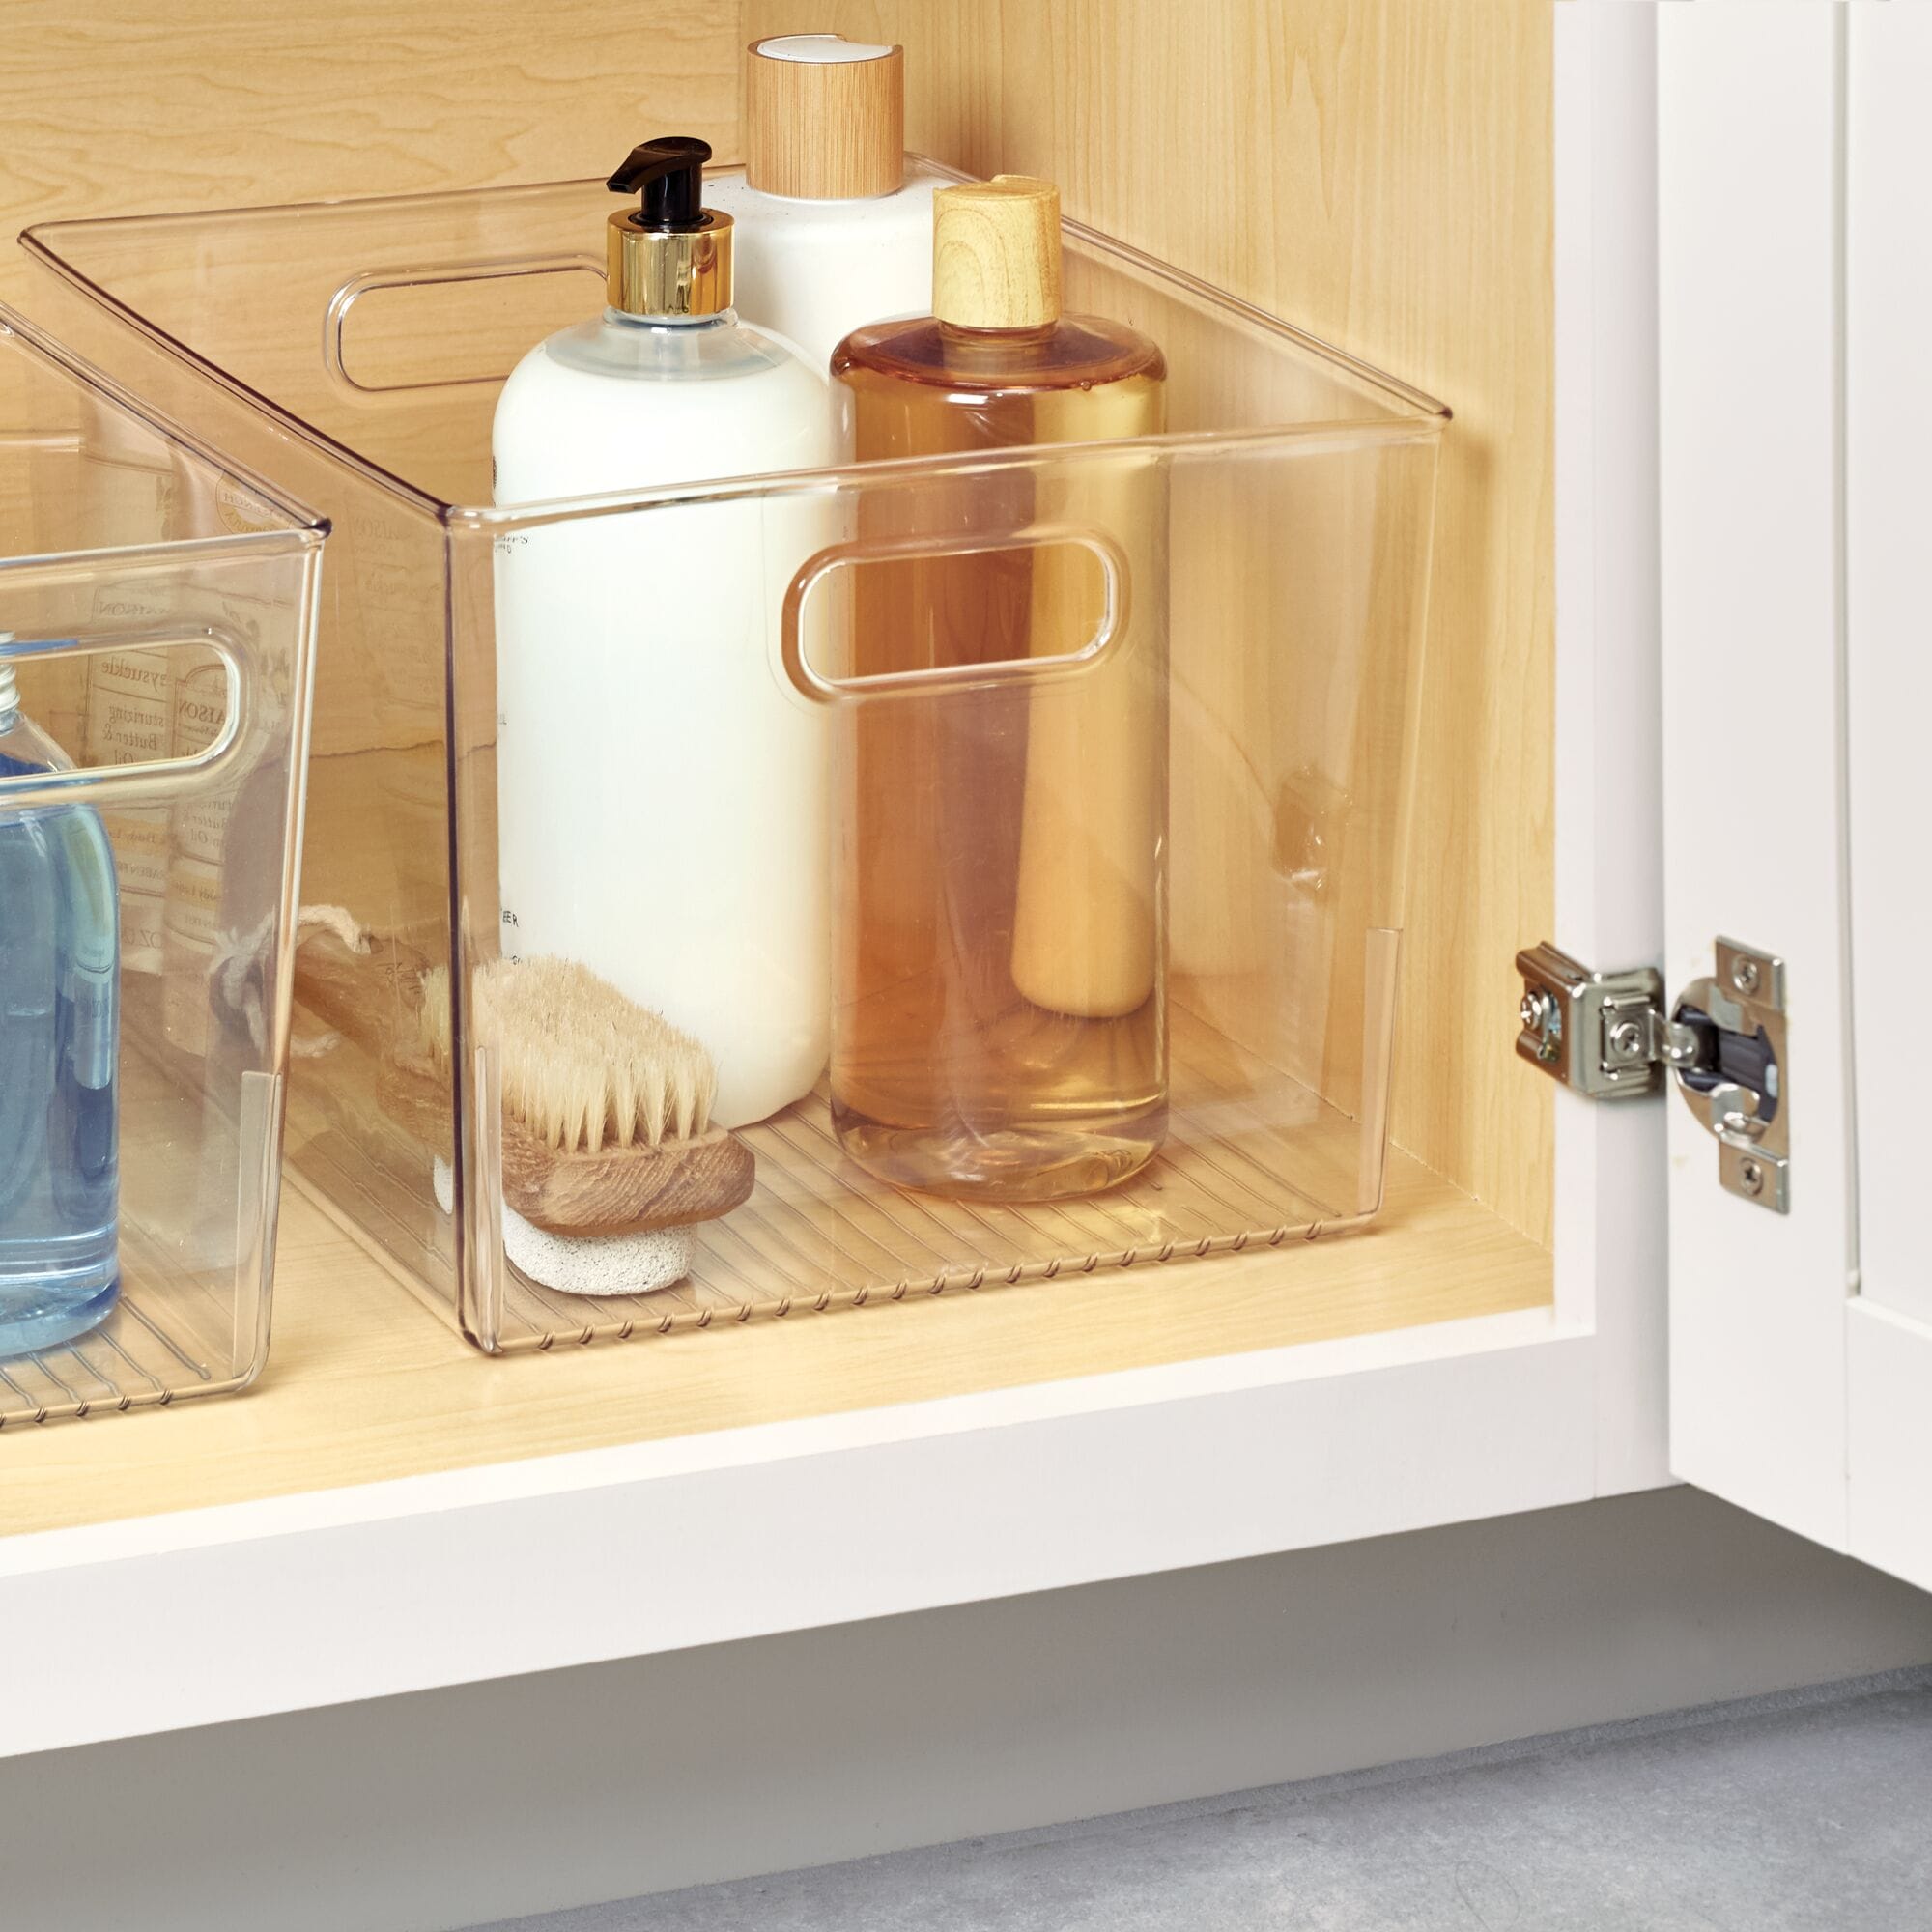 Shop Style Selections Plastic Clear Bin Collection at